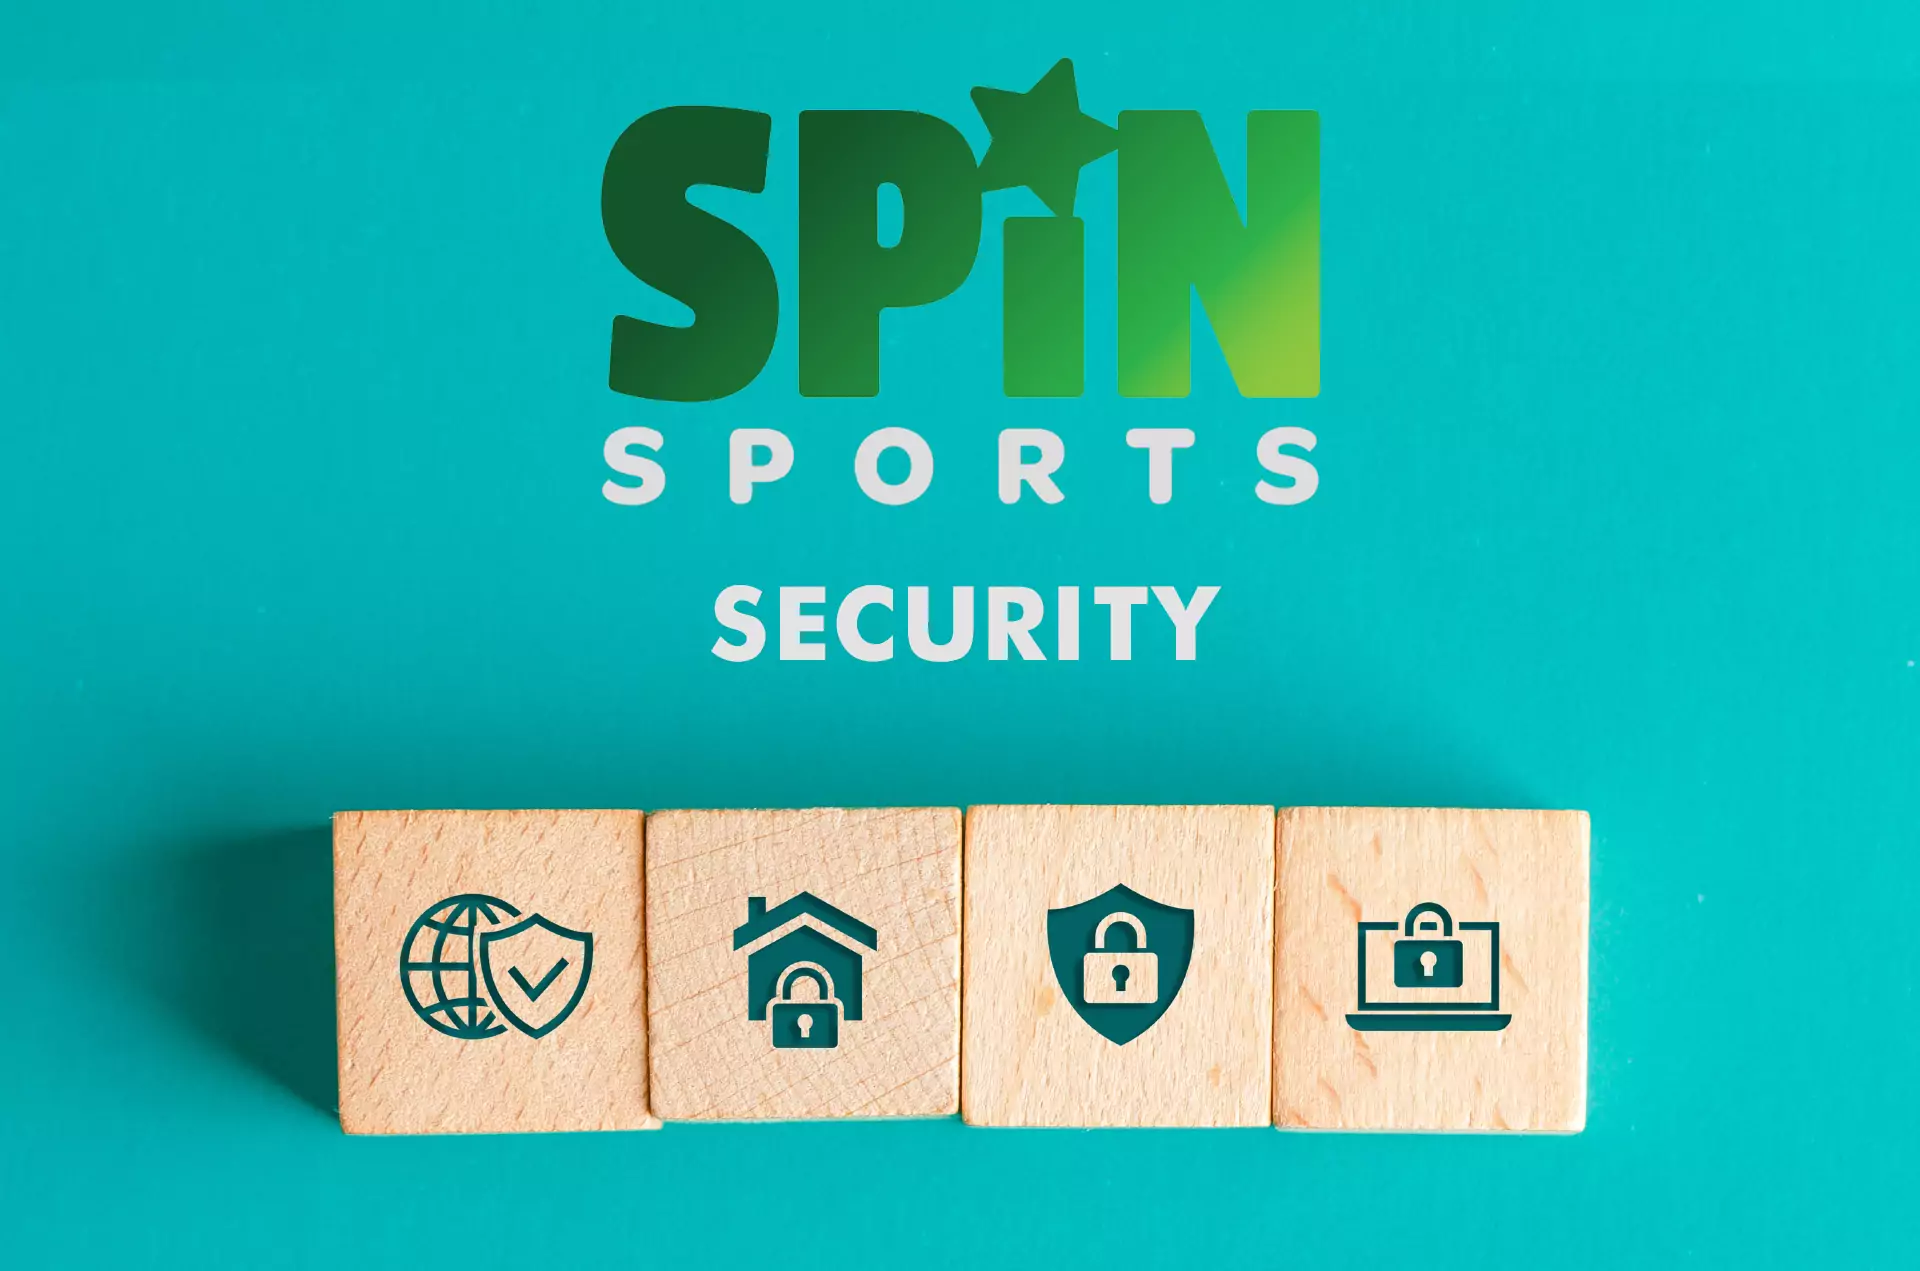 Spin Sports is a secure and legal bookmaker.